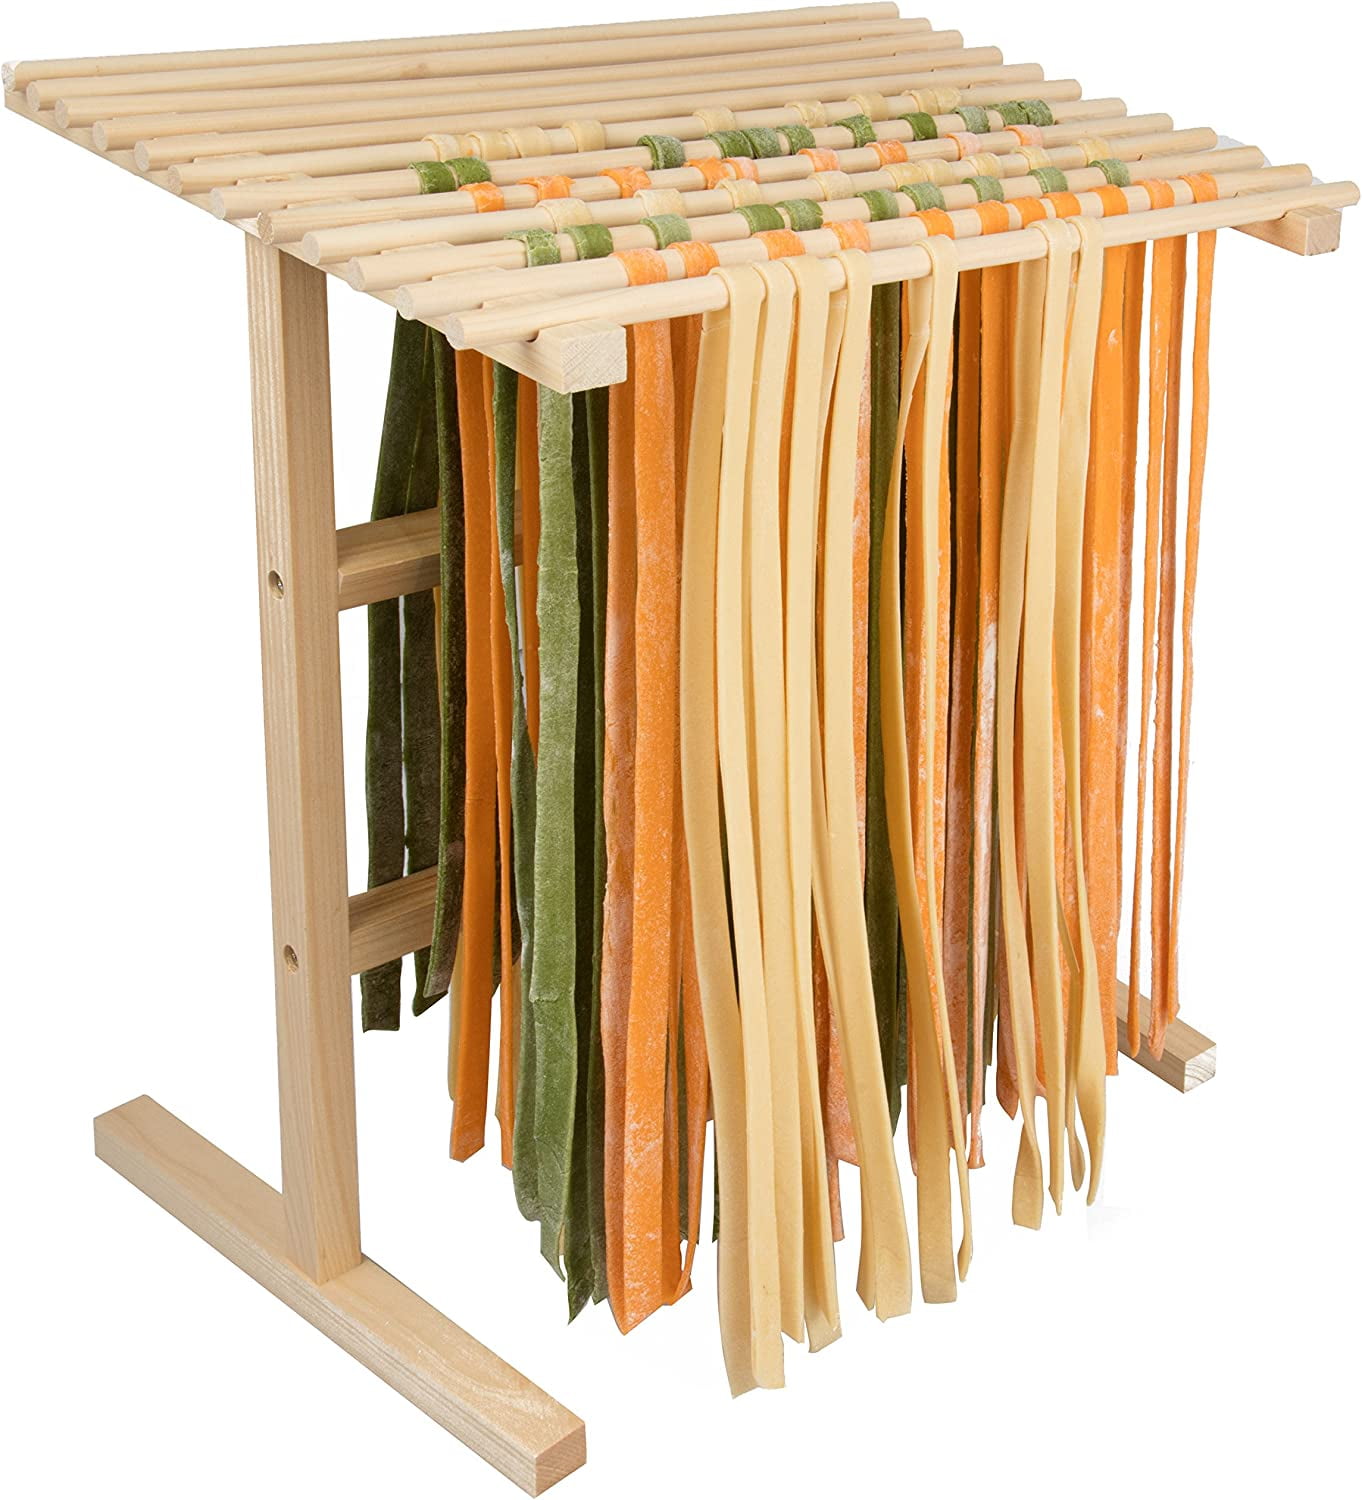 Tohuu Pasta Rack Wooden Noodle Fisherman Pasta Holder with 12 Arms